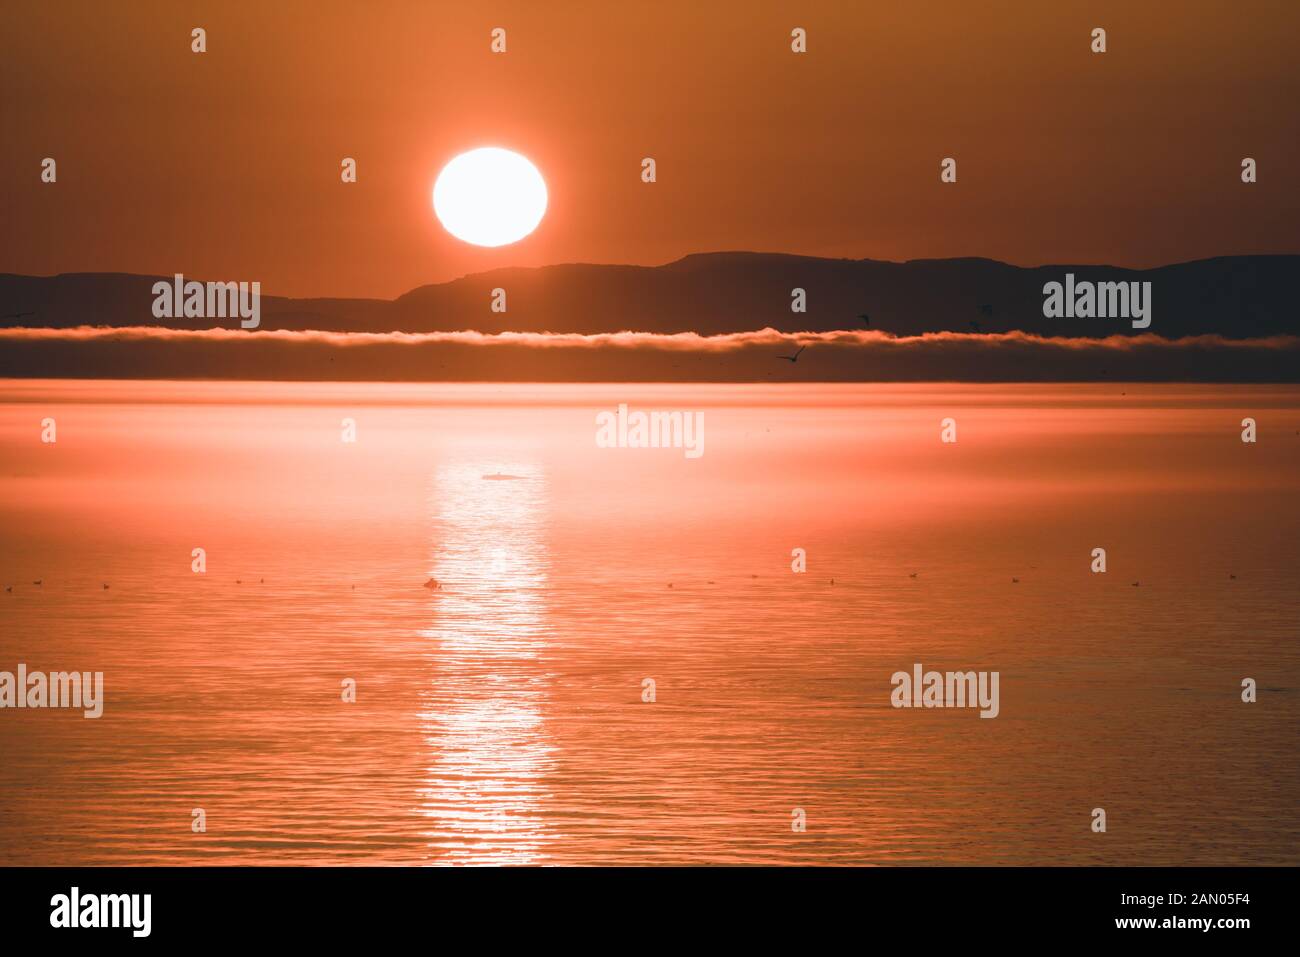 Beautiful Sunset with mountains and icebergs. Arctic circle and ocean. Sunrise horizon with pink sky during midnight sun. Stock Photo